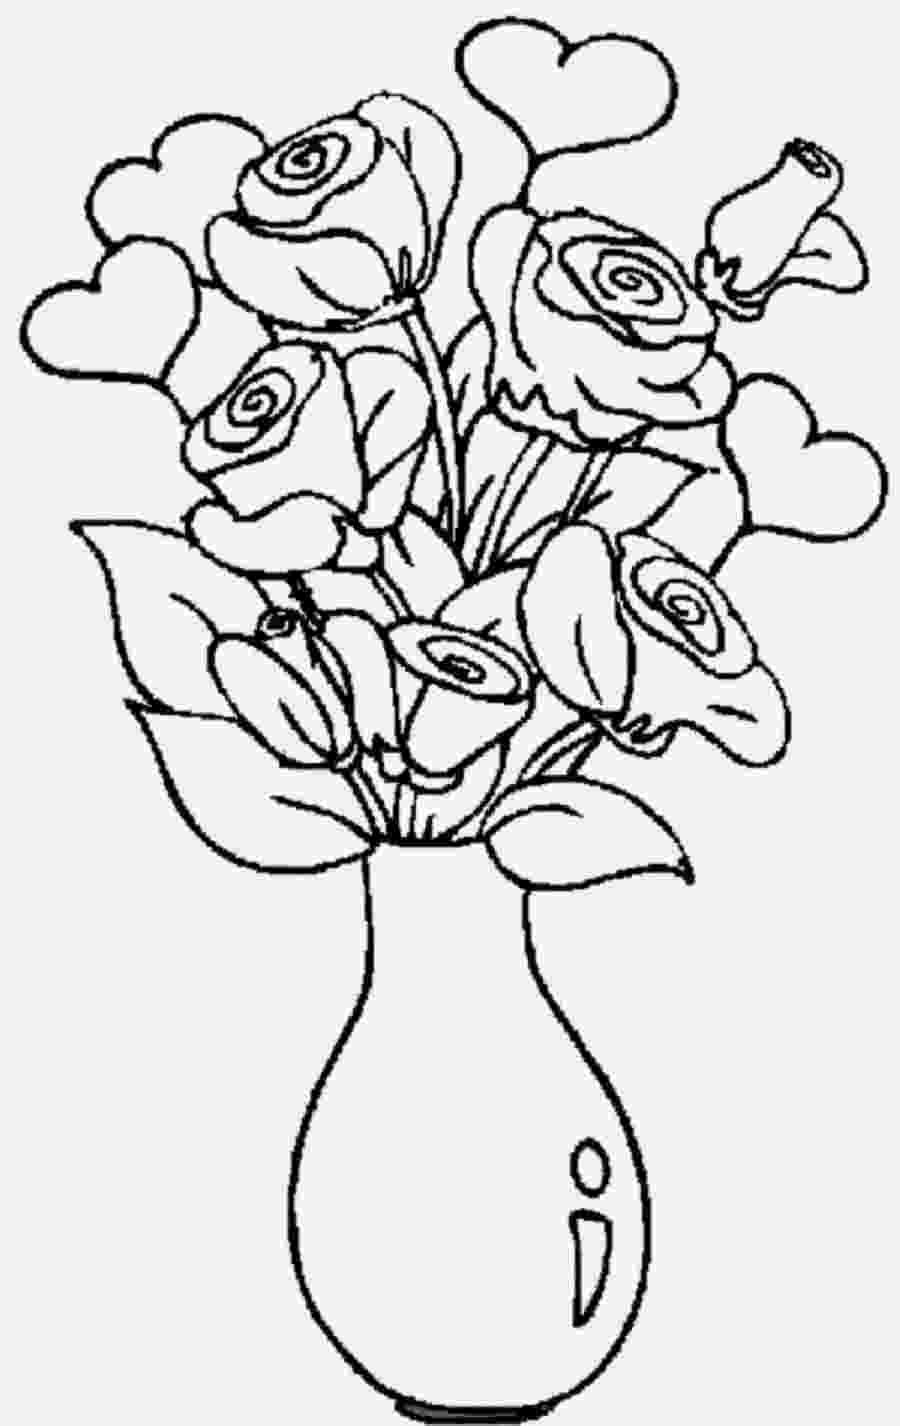 coloring pages flowers in vase gardenia flower vase coloring page download free coloring flowers in pages vase 